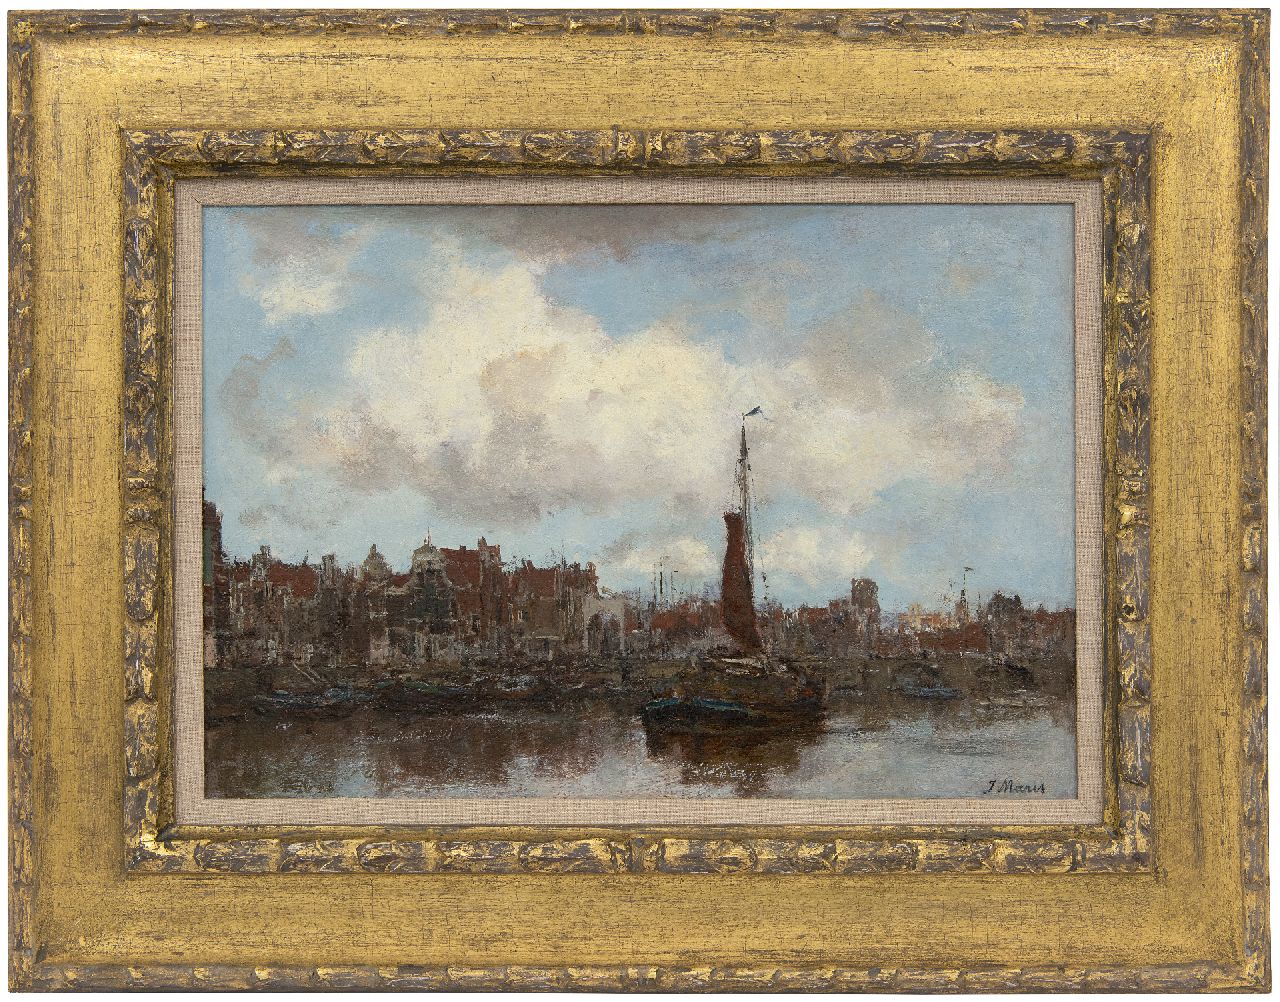 Maris J.H.  | Jacobus Hendricus 'Jacob' Maris | Paintings offered for sale | View of  town (Amsterdam), oil on canvas 31.3 x 44.9 cm, signed l.r.